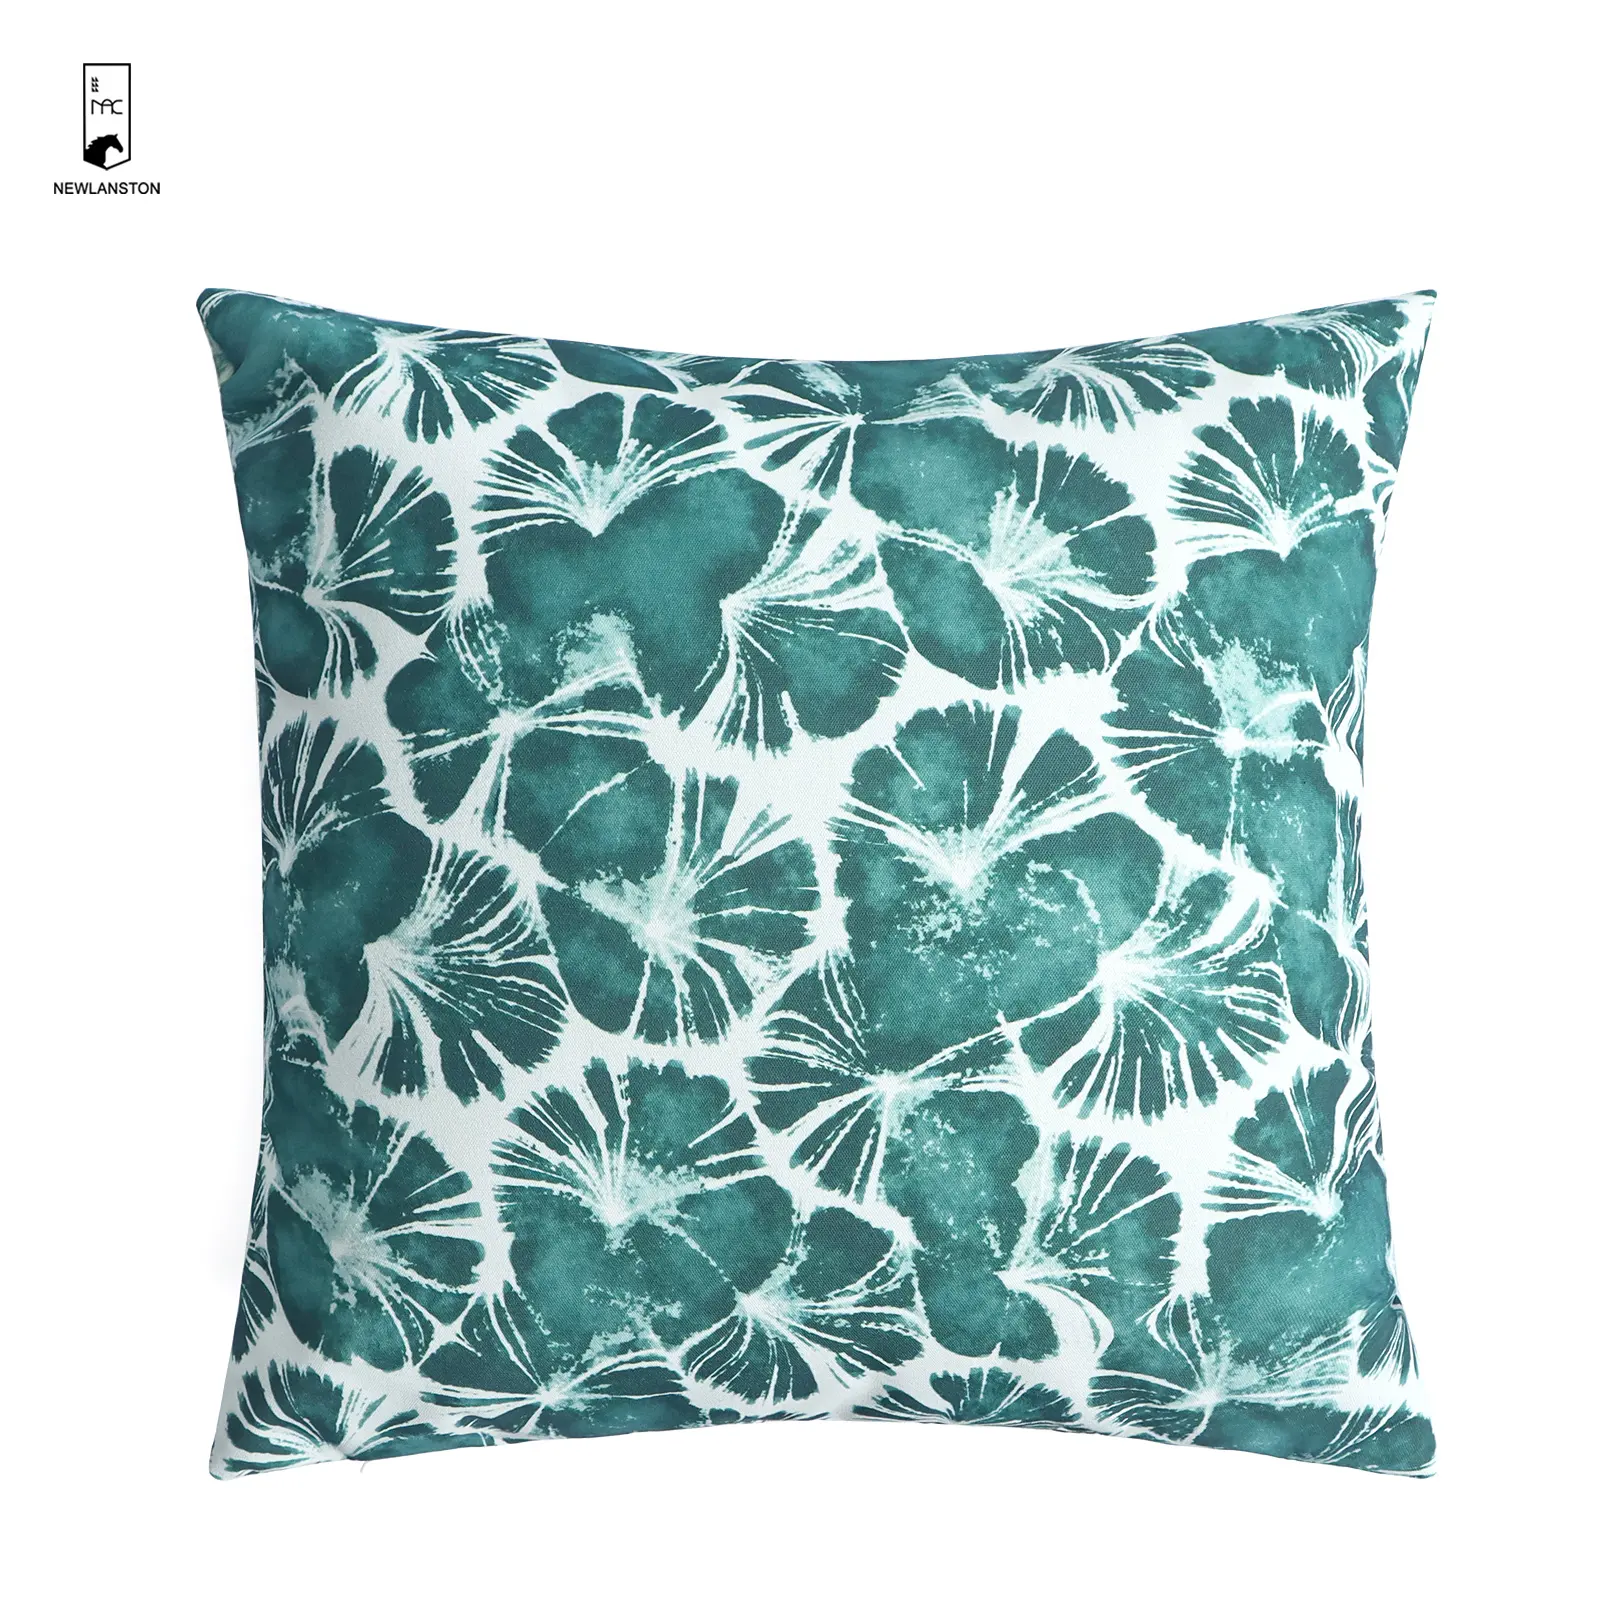 Outdoor Cushion Cover Green Leaves Digital Printing Waterproof Fabric Garden Sofa Decor Pillow Cases